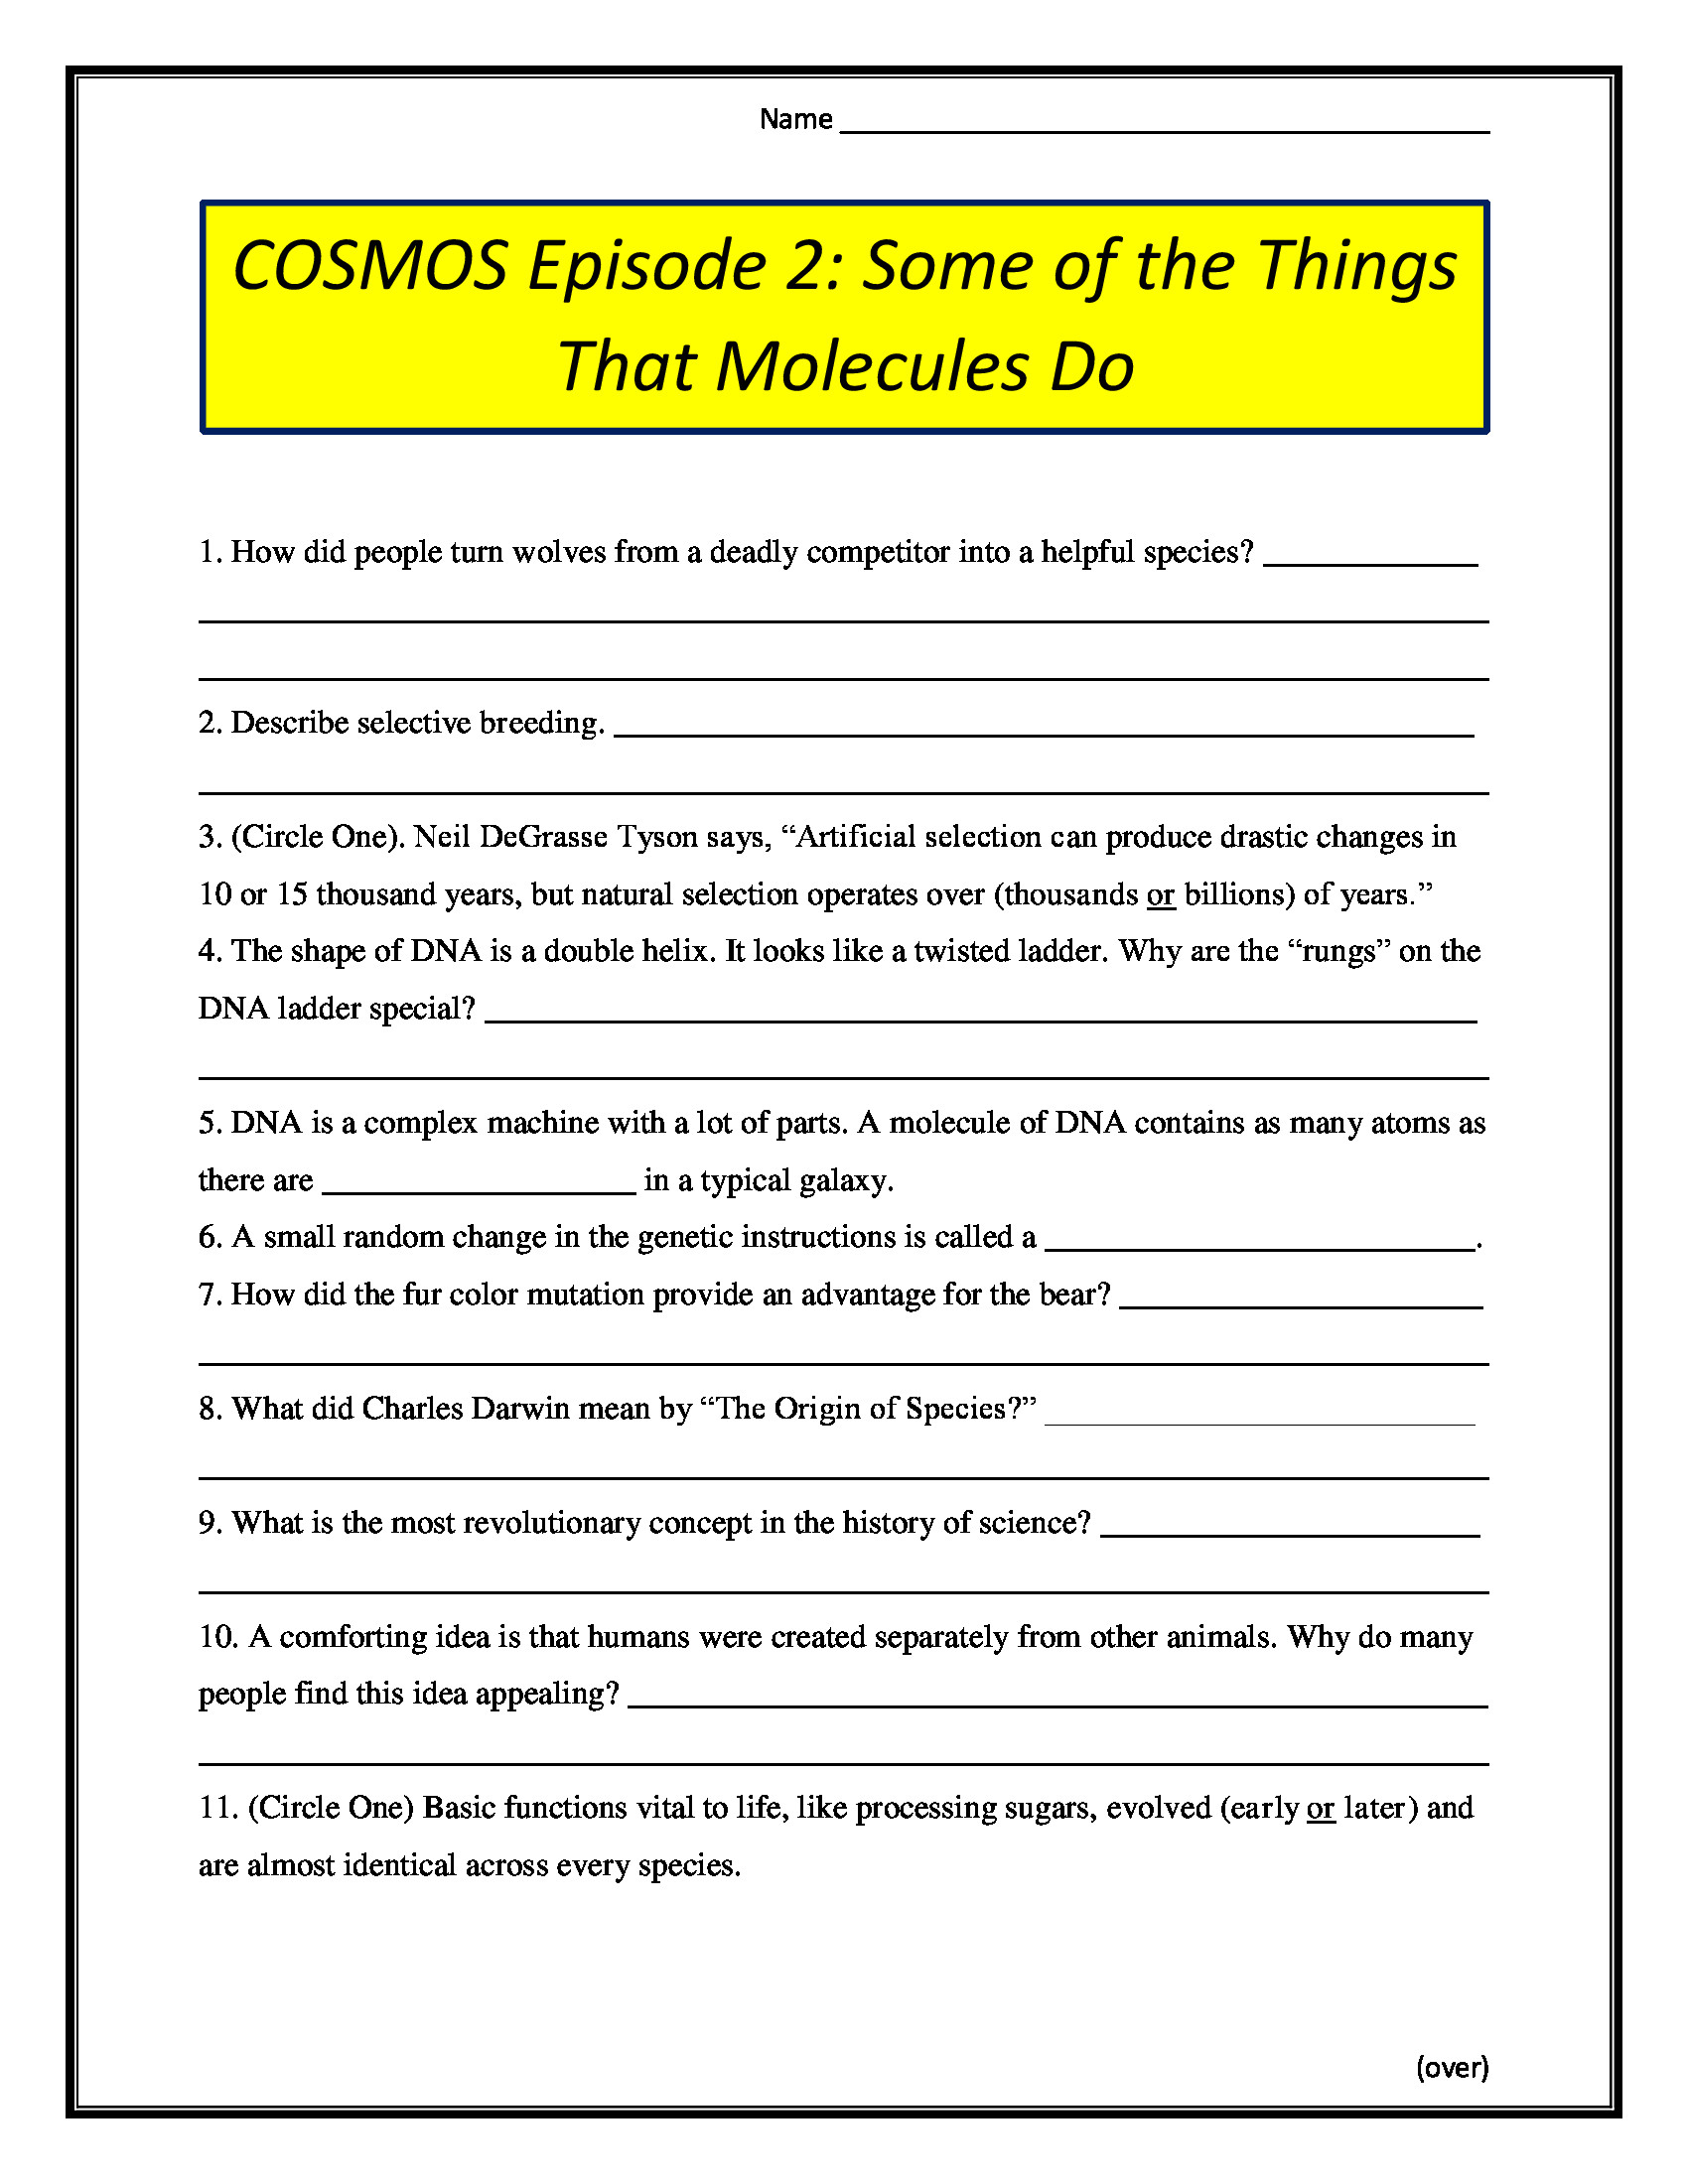 Cosmos Episode 1 Worksheet Answers Cosmos Episode 2 some Of the Things that Molecules Do Worksheet 2014